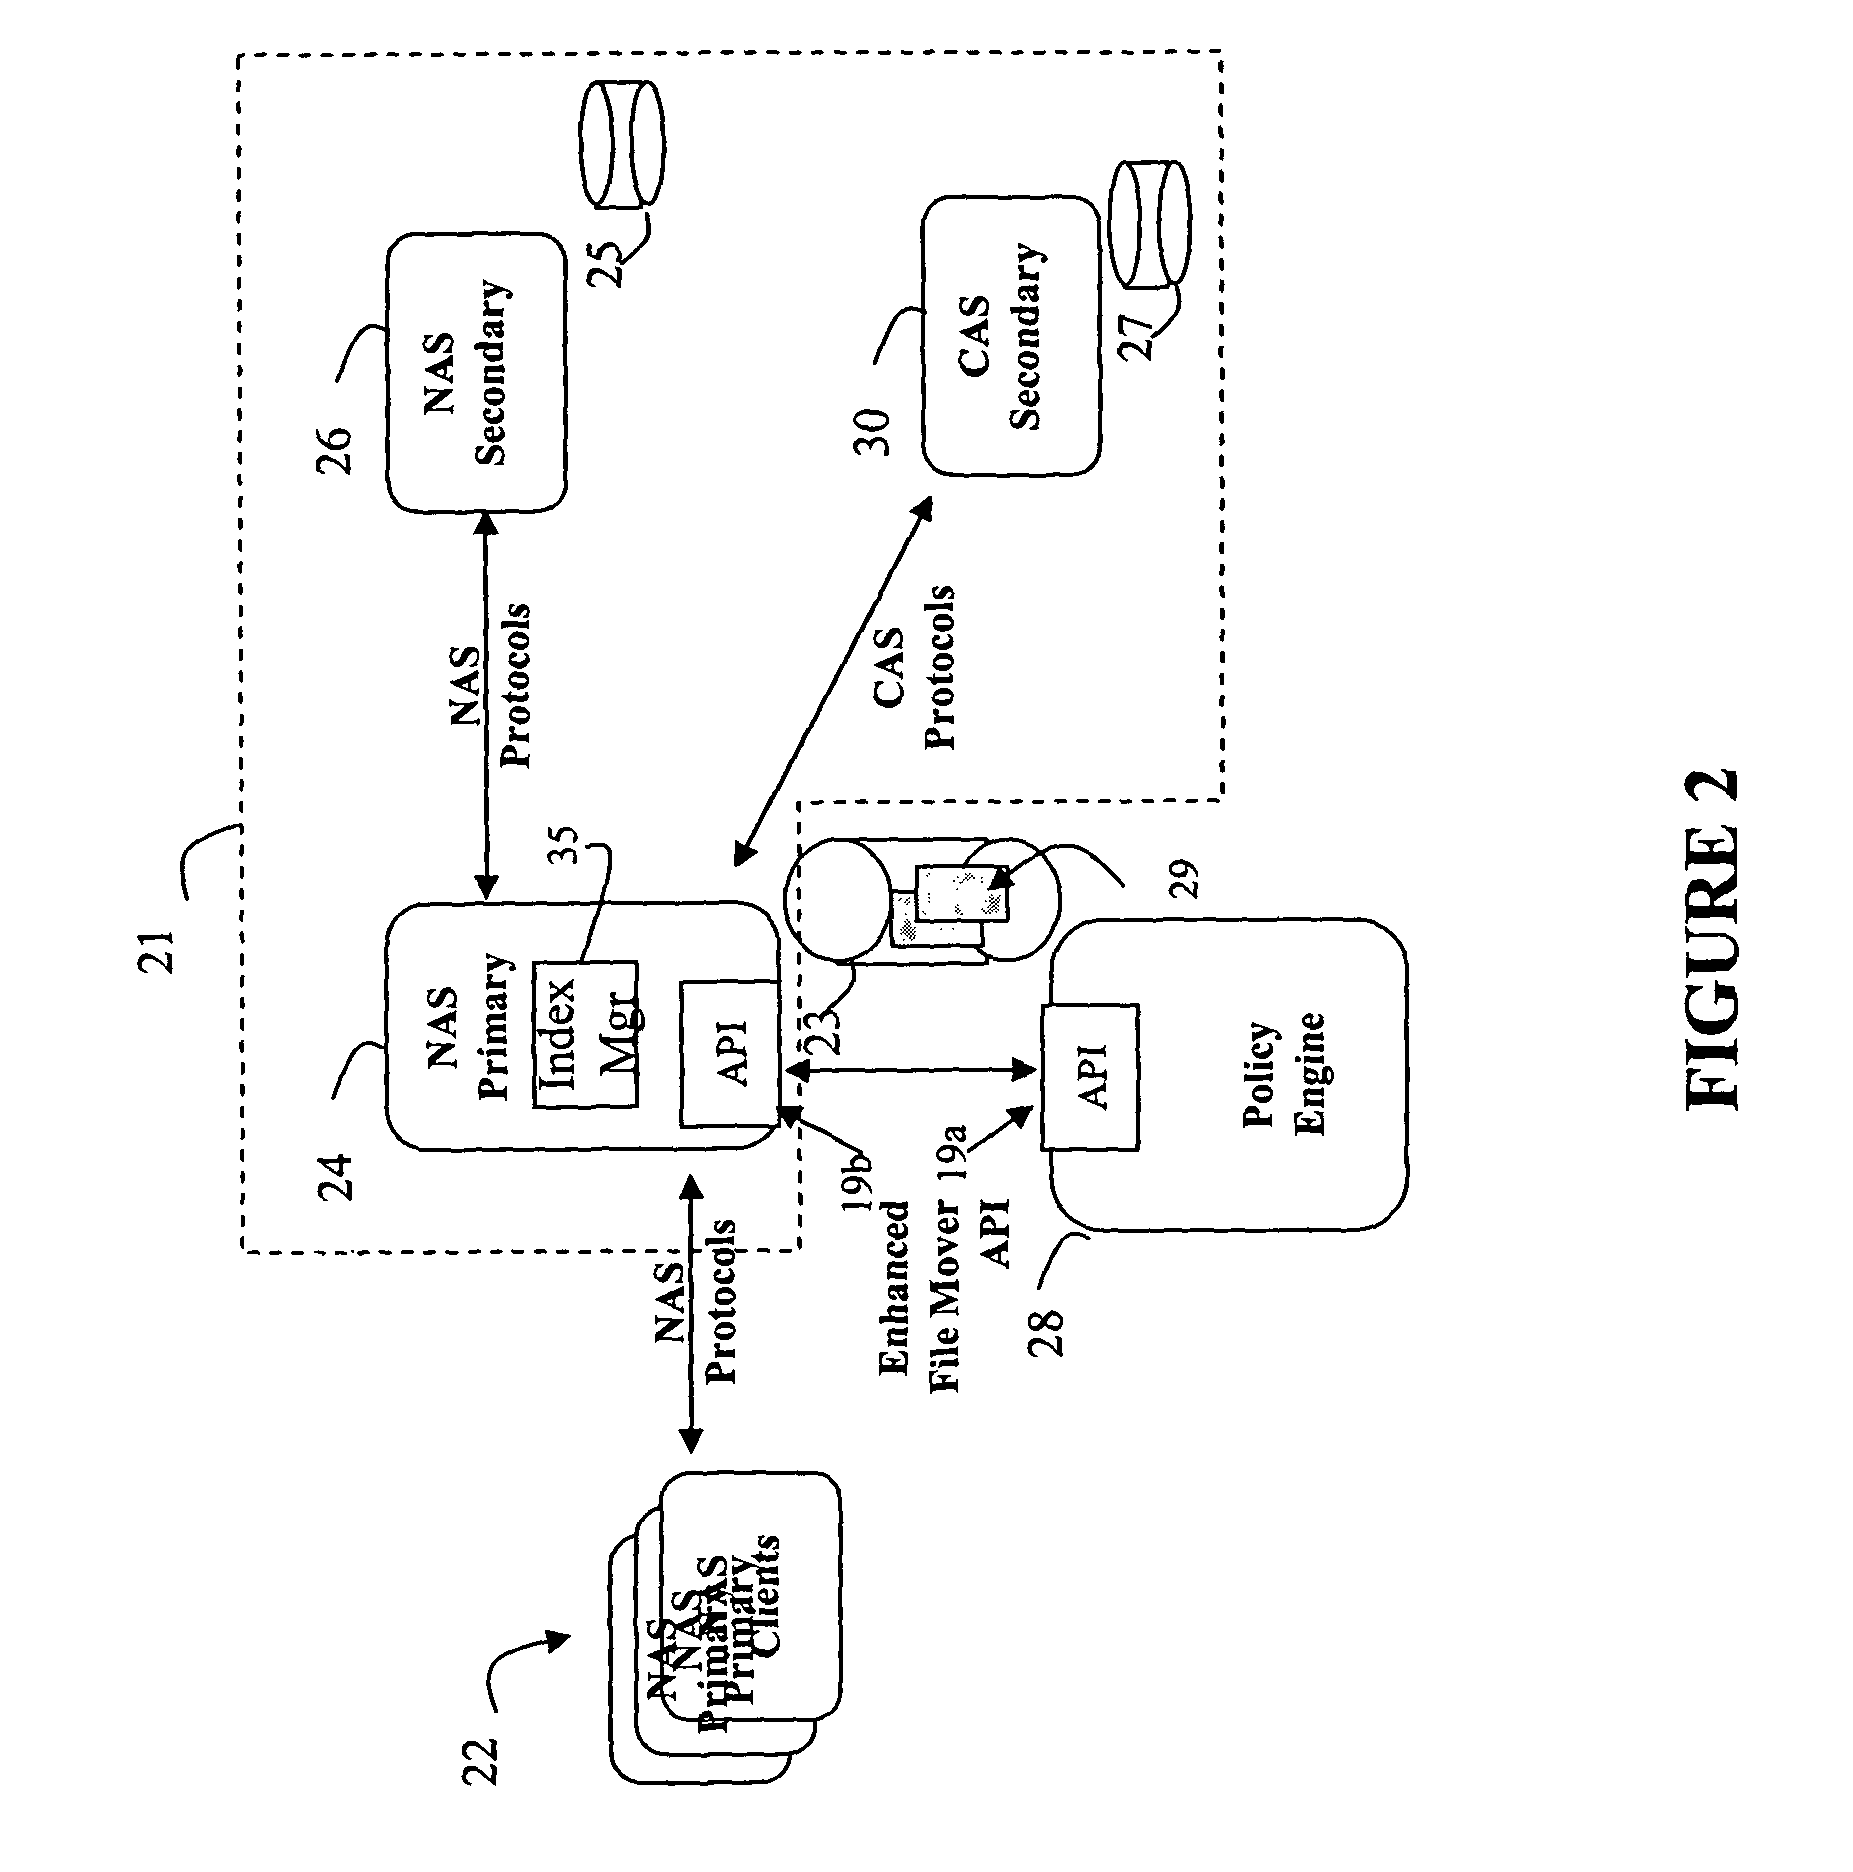 File system query and method of use